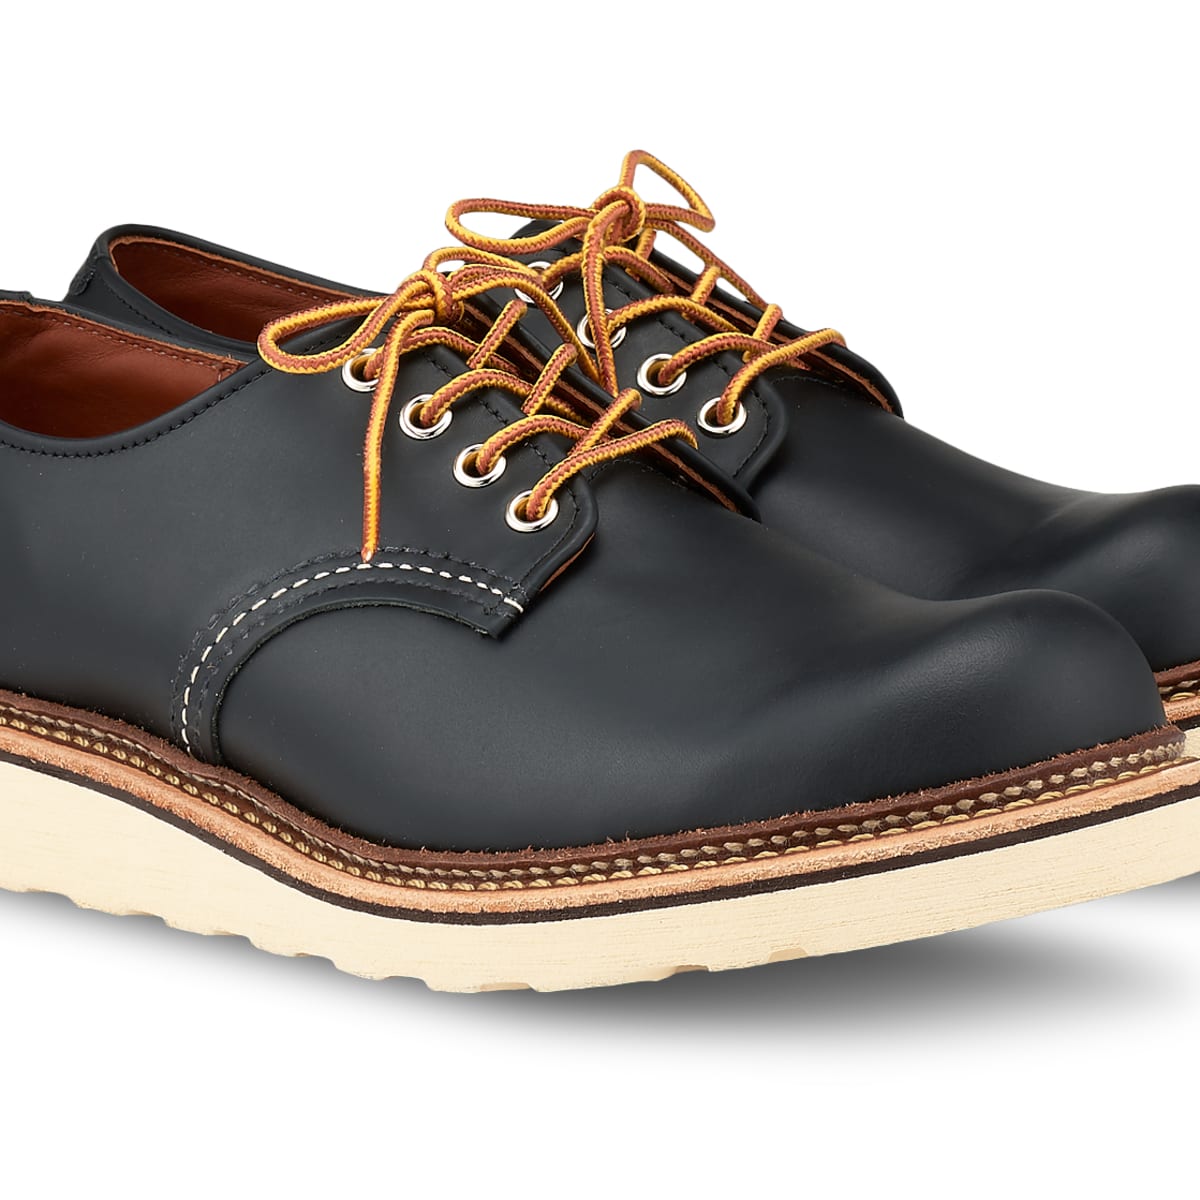 red wing heritage oxford